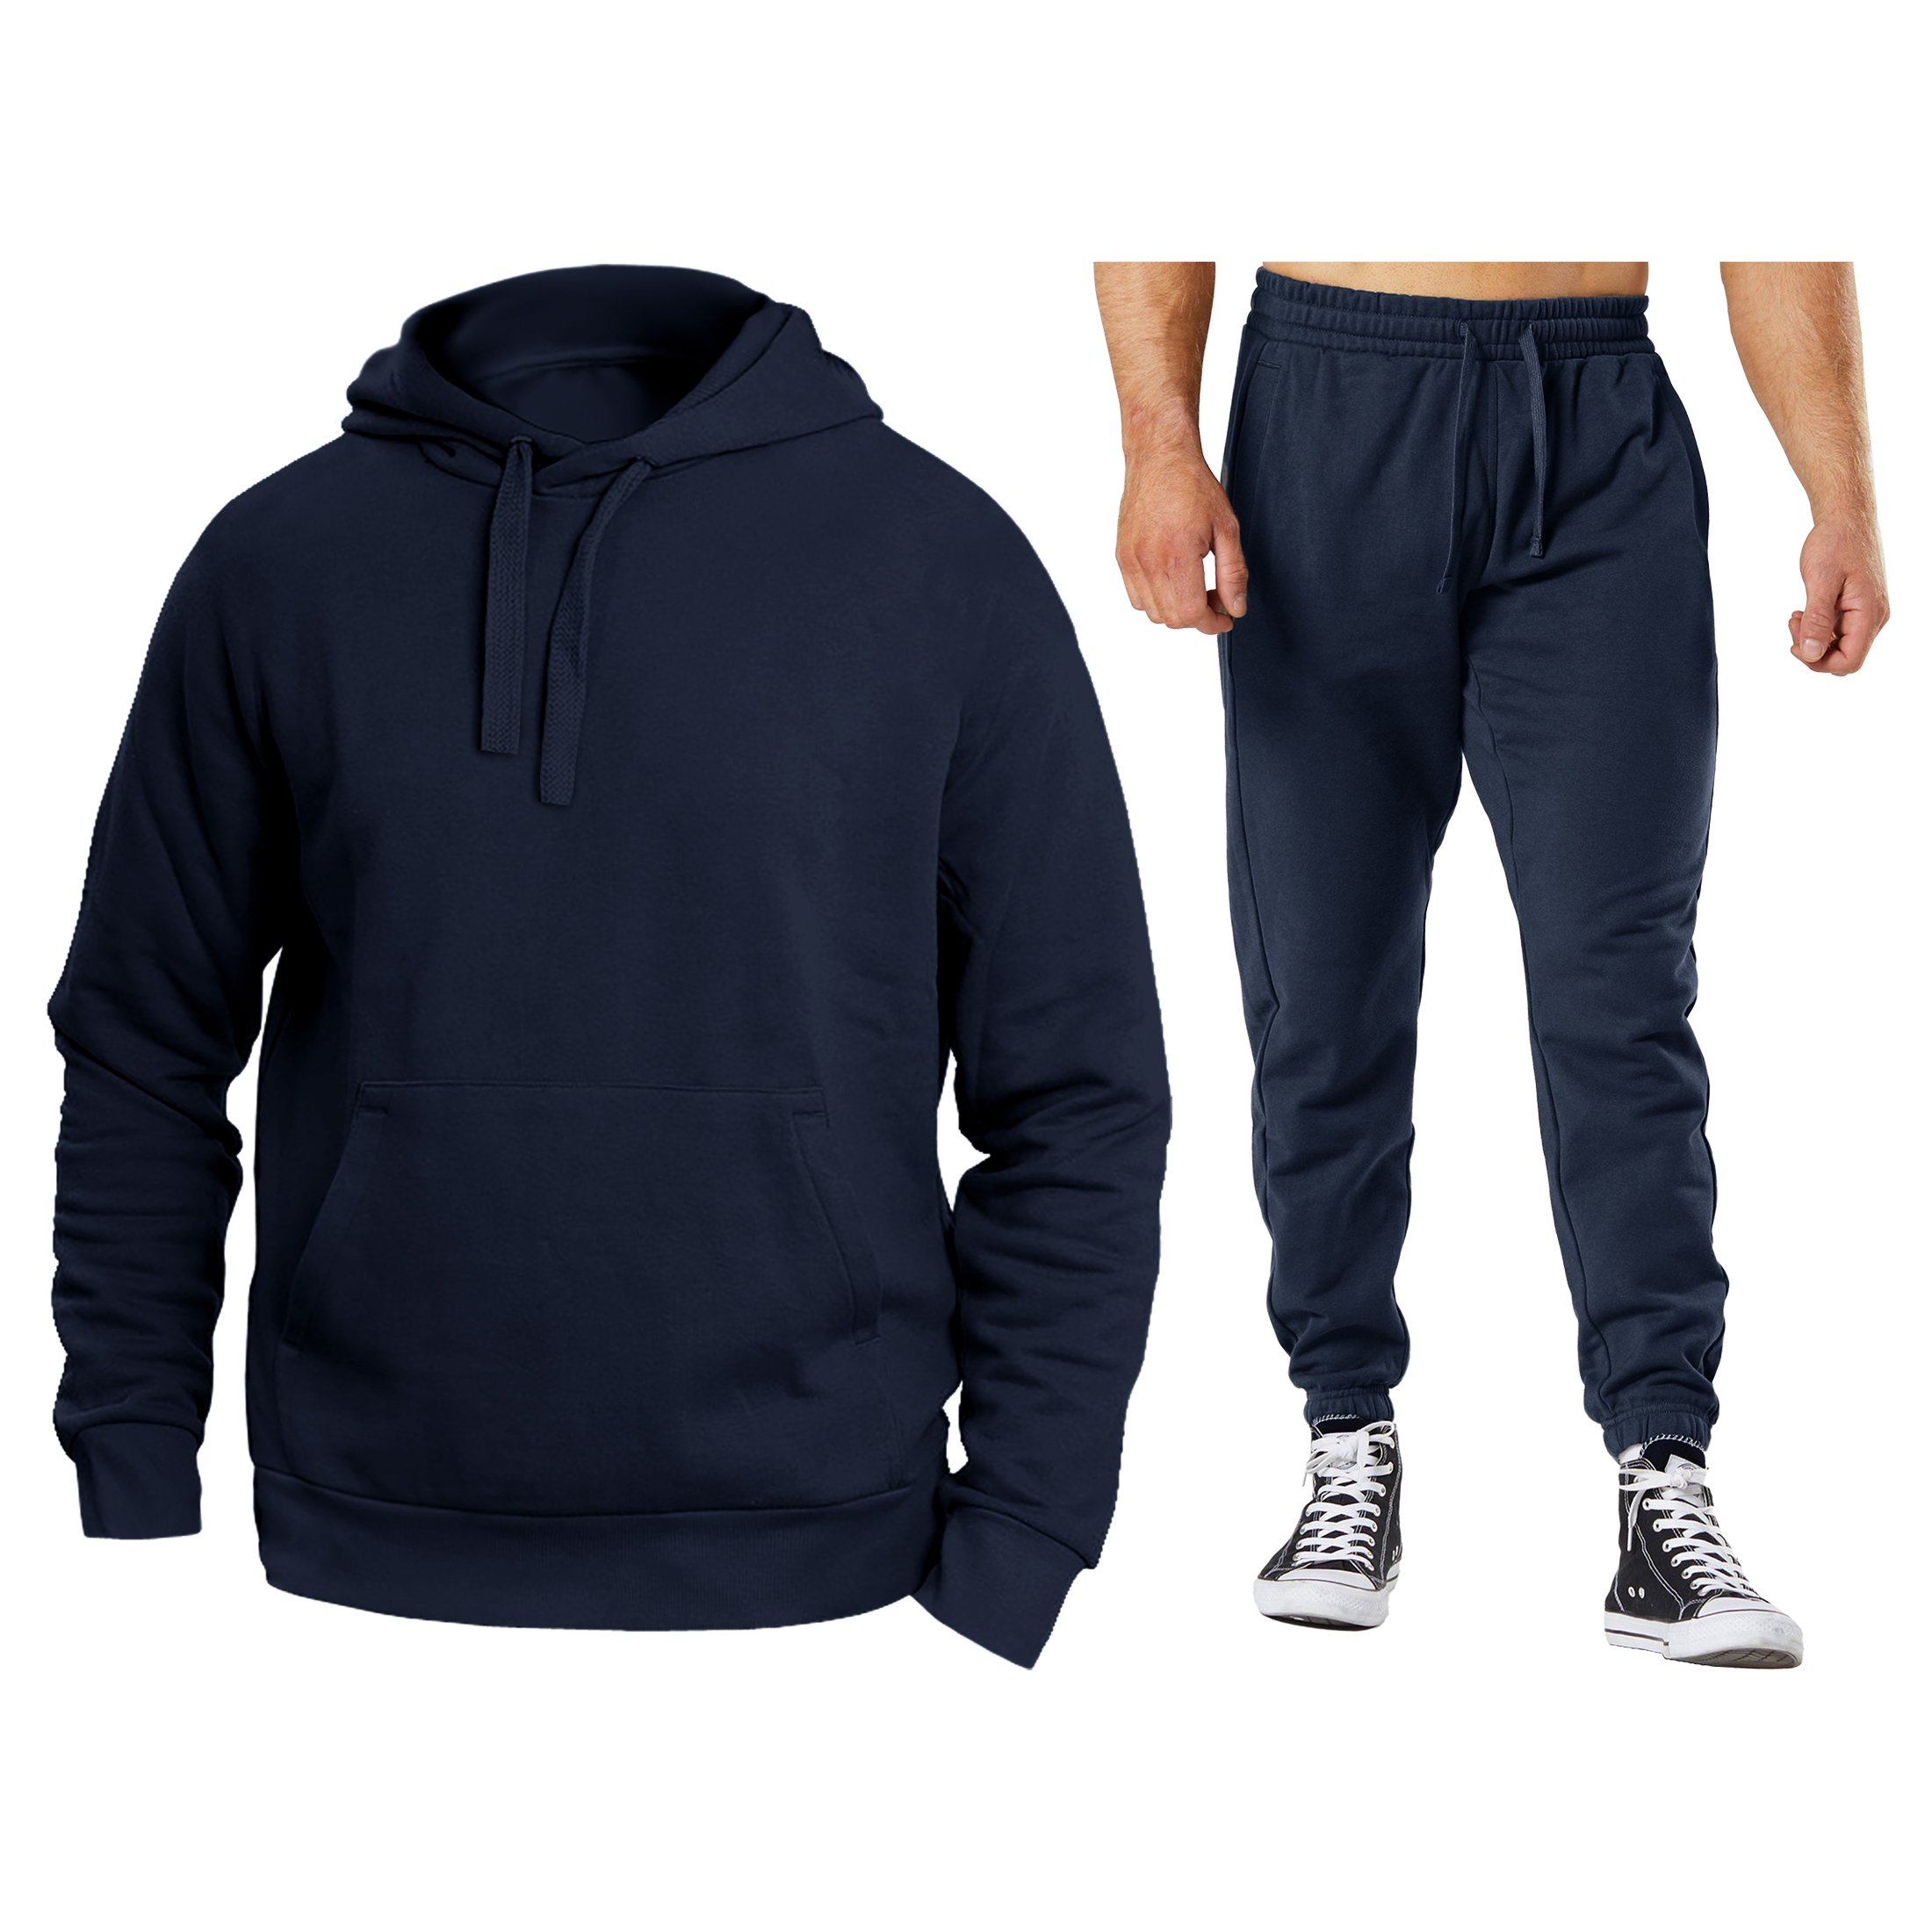 Men's Athletic Warm Jogging Pullover Active Sweatsuit - Navy, Small